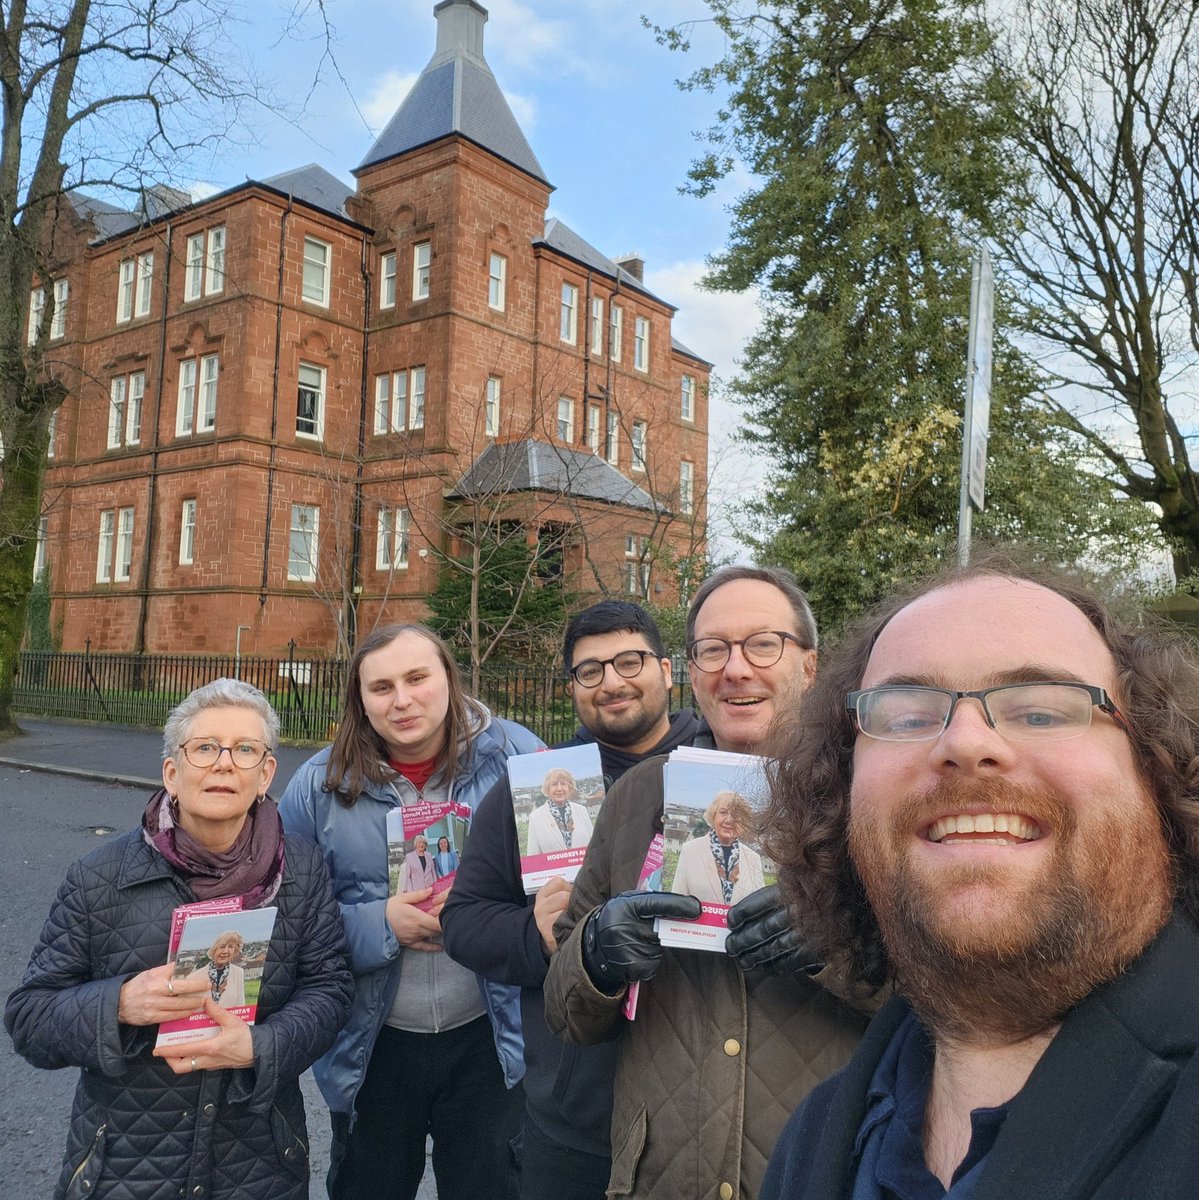 🌲After a short break, back out on the #LabourDoorstep in The Avenues this evening. 👋Some had already decided they were voting for @PJFerguson18 and want a #GeneralElectionlNow to let them. 🚐Loads of people looking again at Labour, after feeling let down by the SNP.